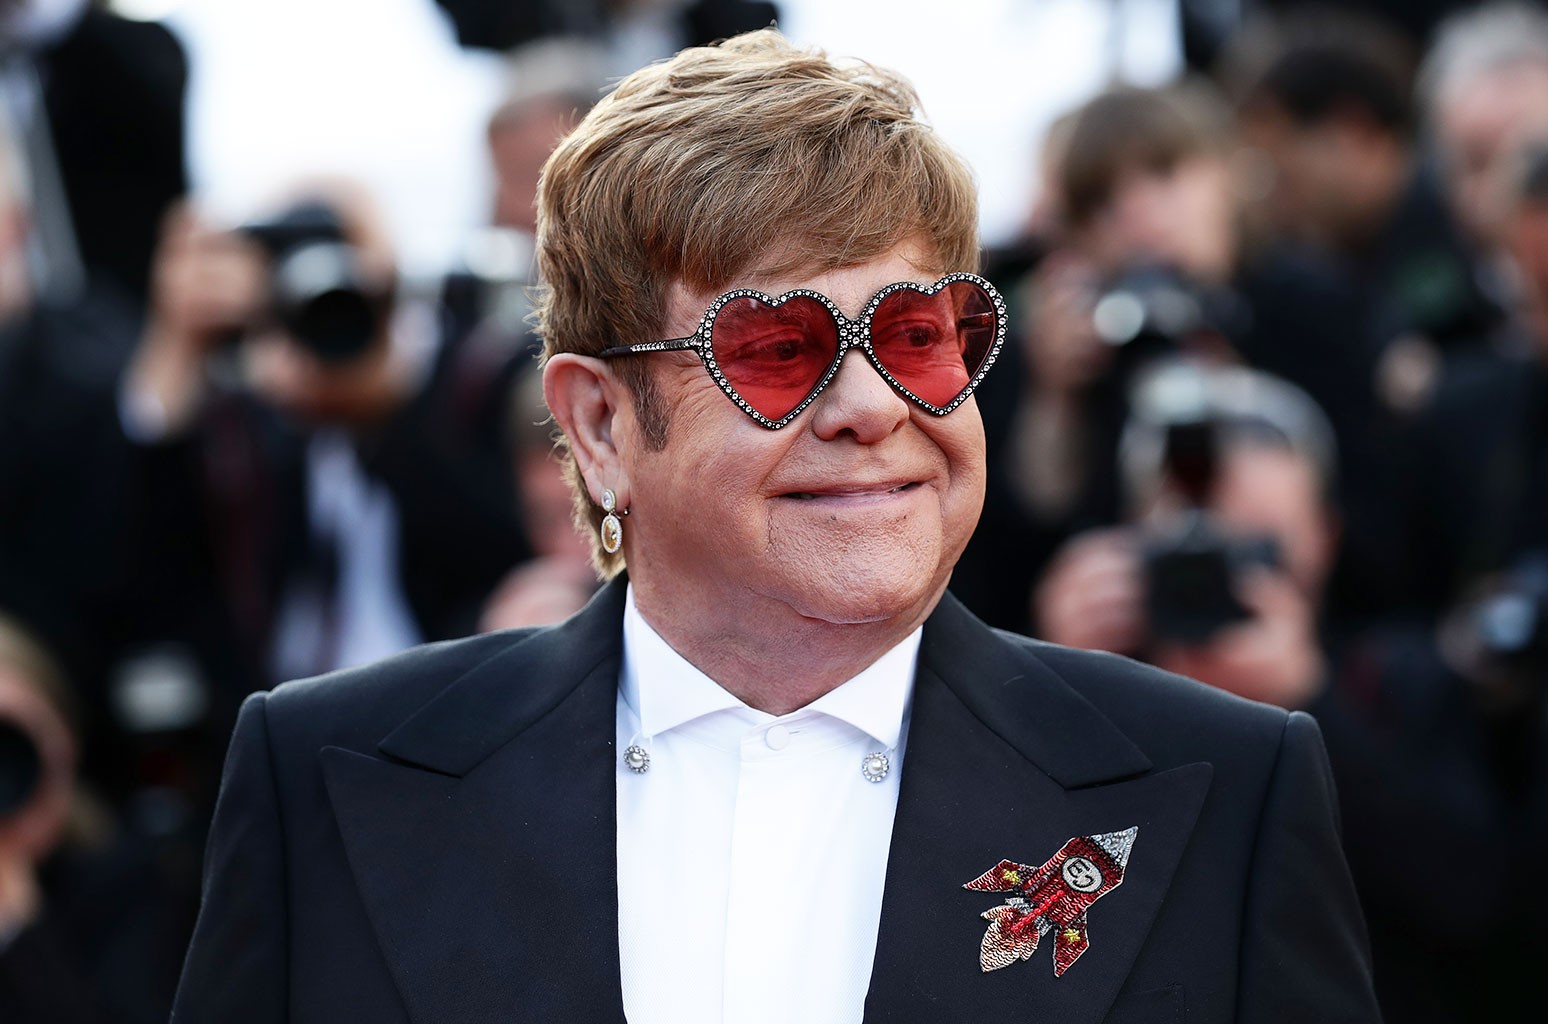 Elton John includes dates to the final farewell tour, including big stadium shows